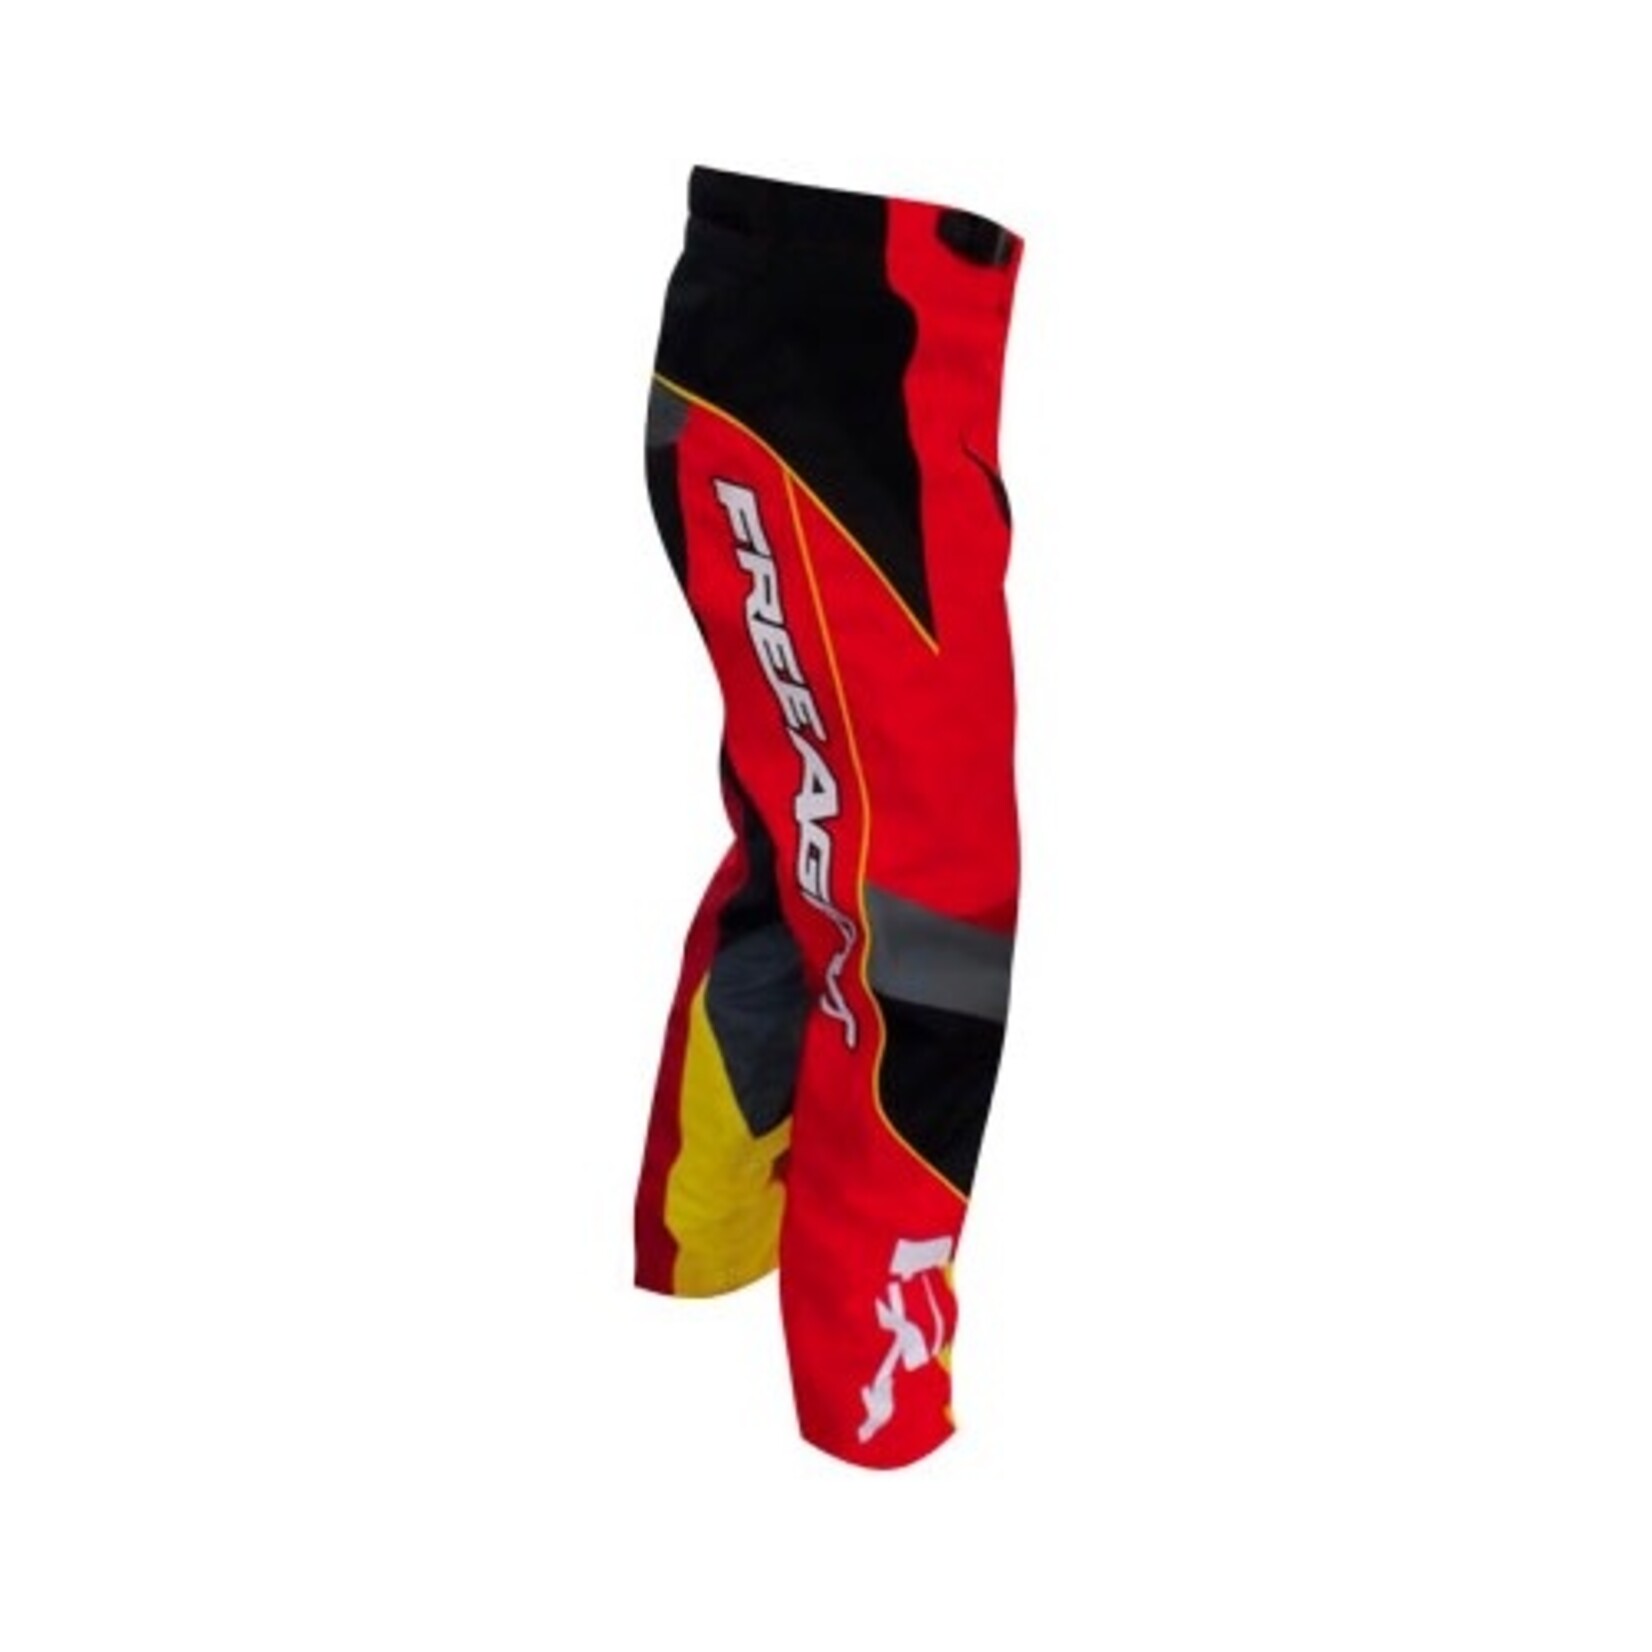 Free Agent Team Youth Pant Red/White/Black